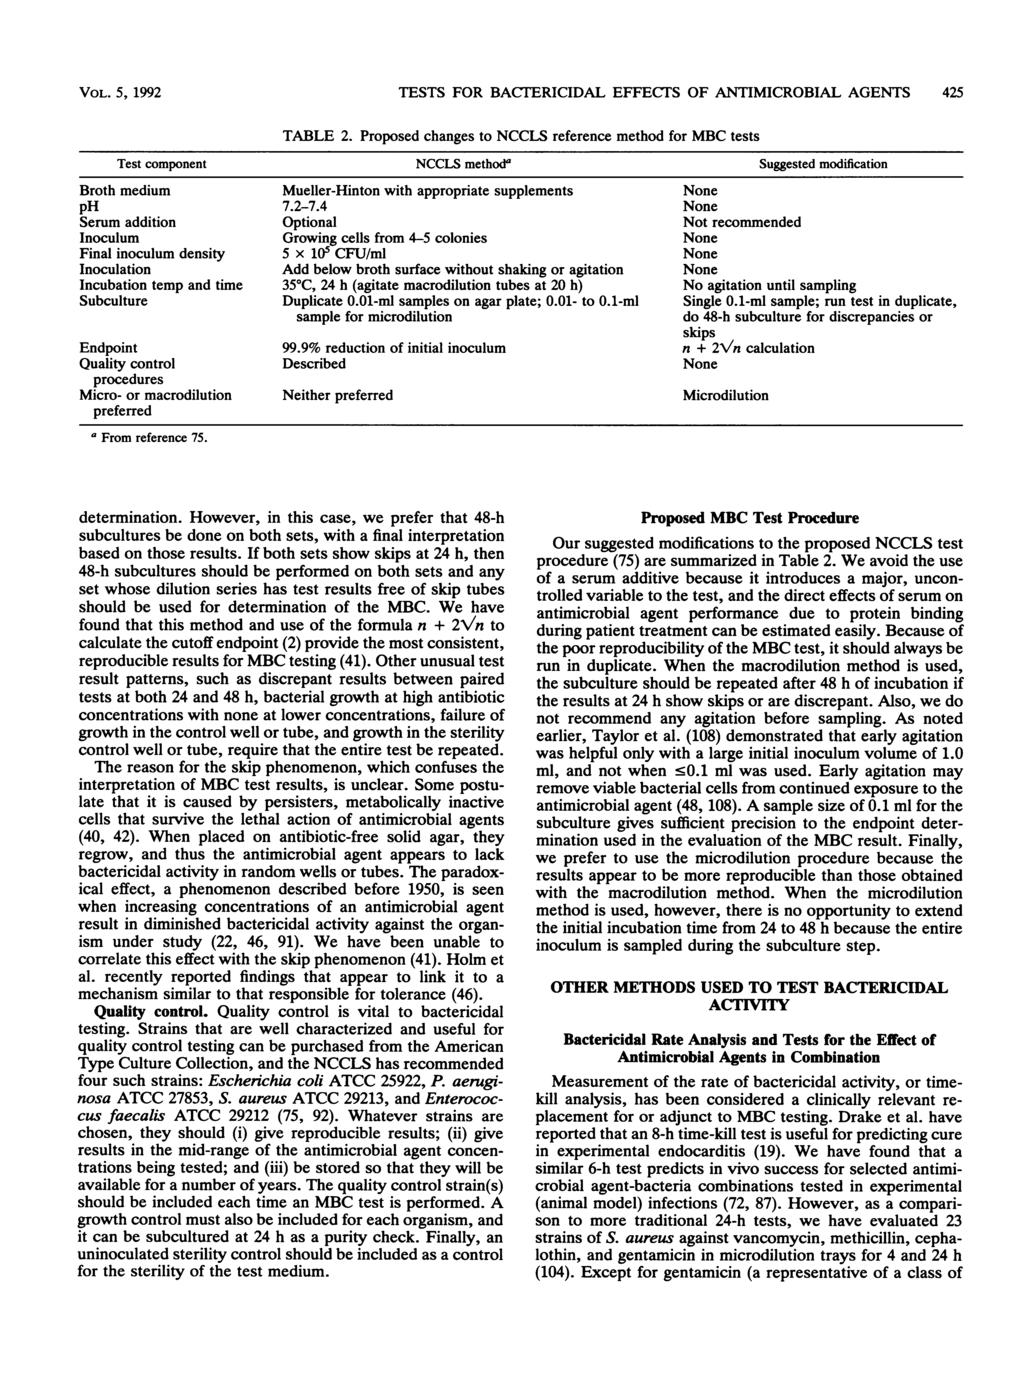 VOL. 5, 1992 TESTS FOR BACTERICIDAL EFFECTS OF ANTIMICROBIAL AGENTS 425 TABLE 2.